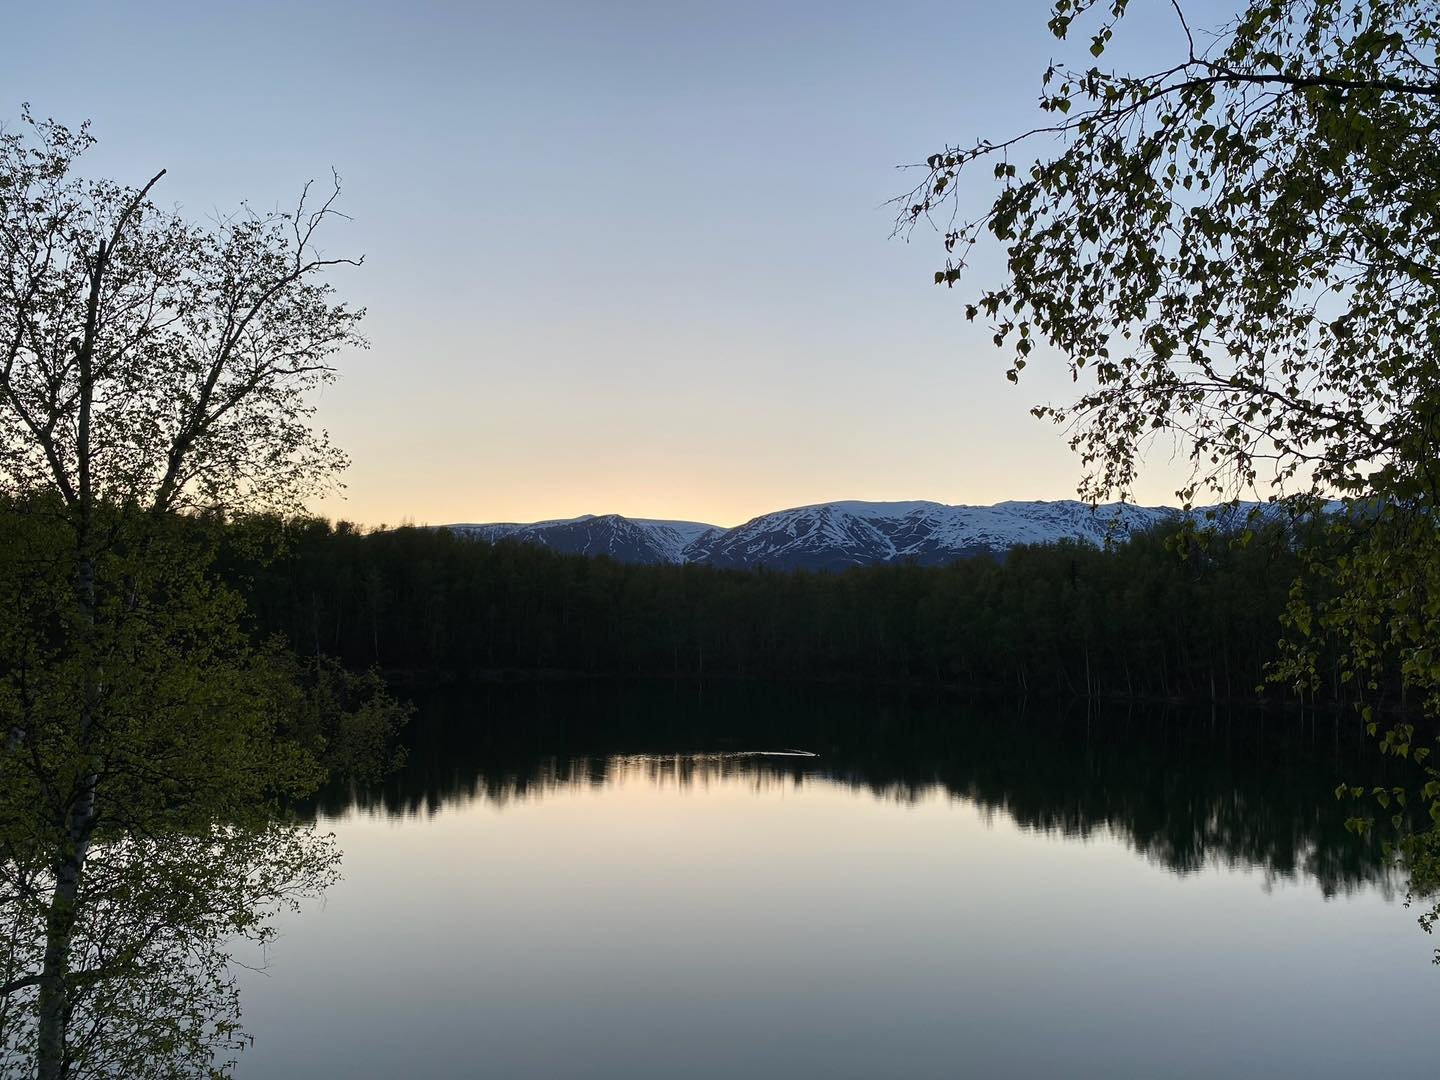 Enjoy peaceful moments on the lake, accented by the earthy scent of new leaves budding on the trees.

Let the clear wilderness air rejuvenate your mind and your body as you rest surrounded in boundless acres of beautiful Alaska wilderness.

Come to M